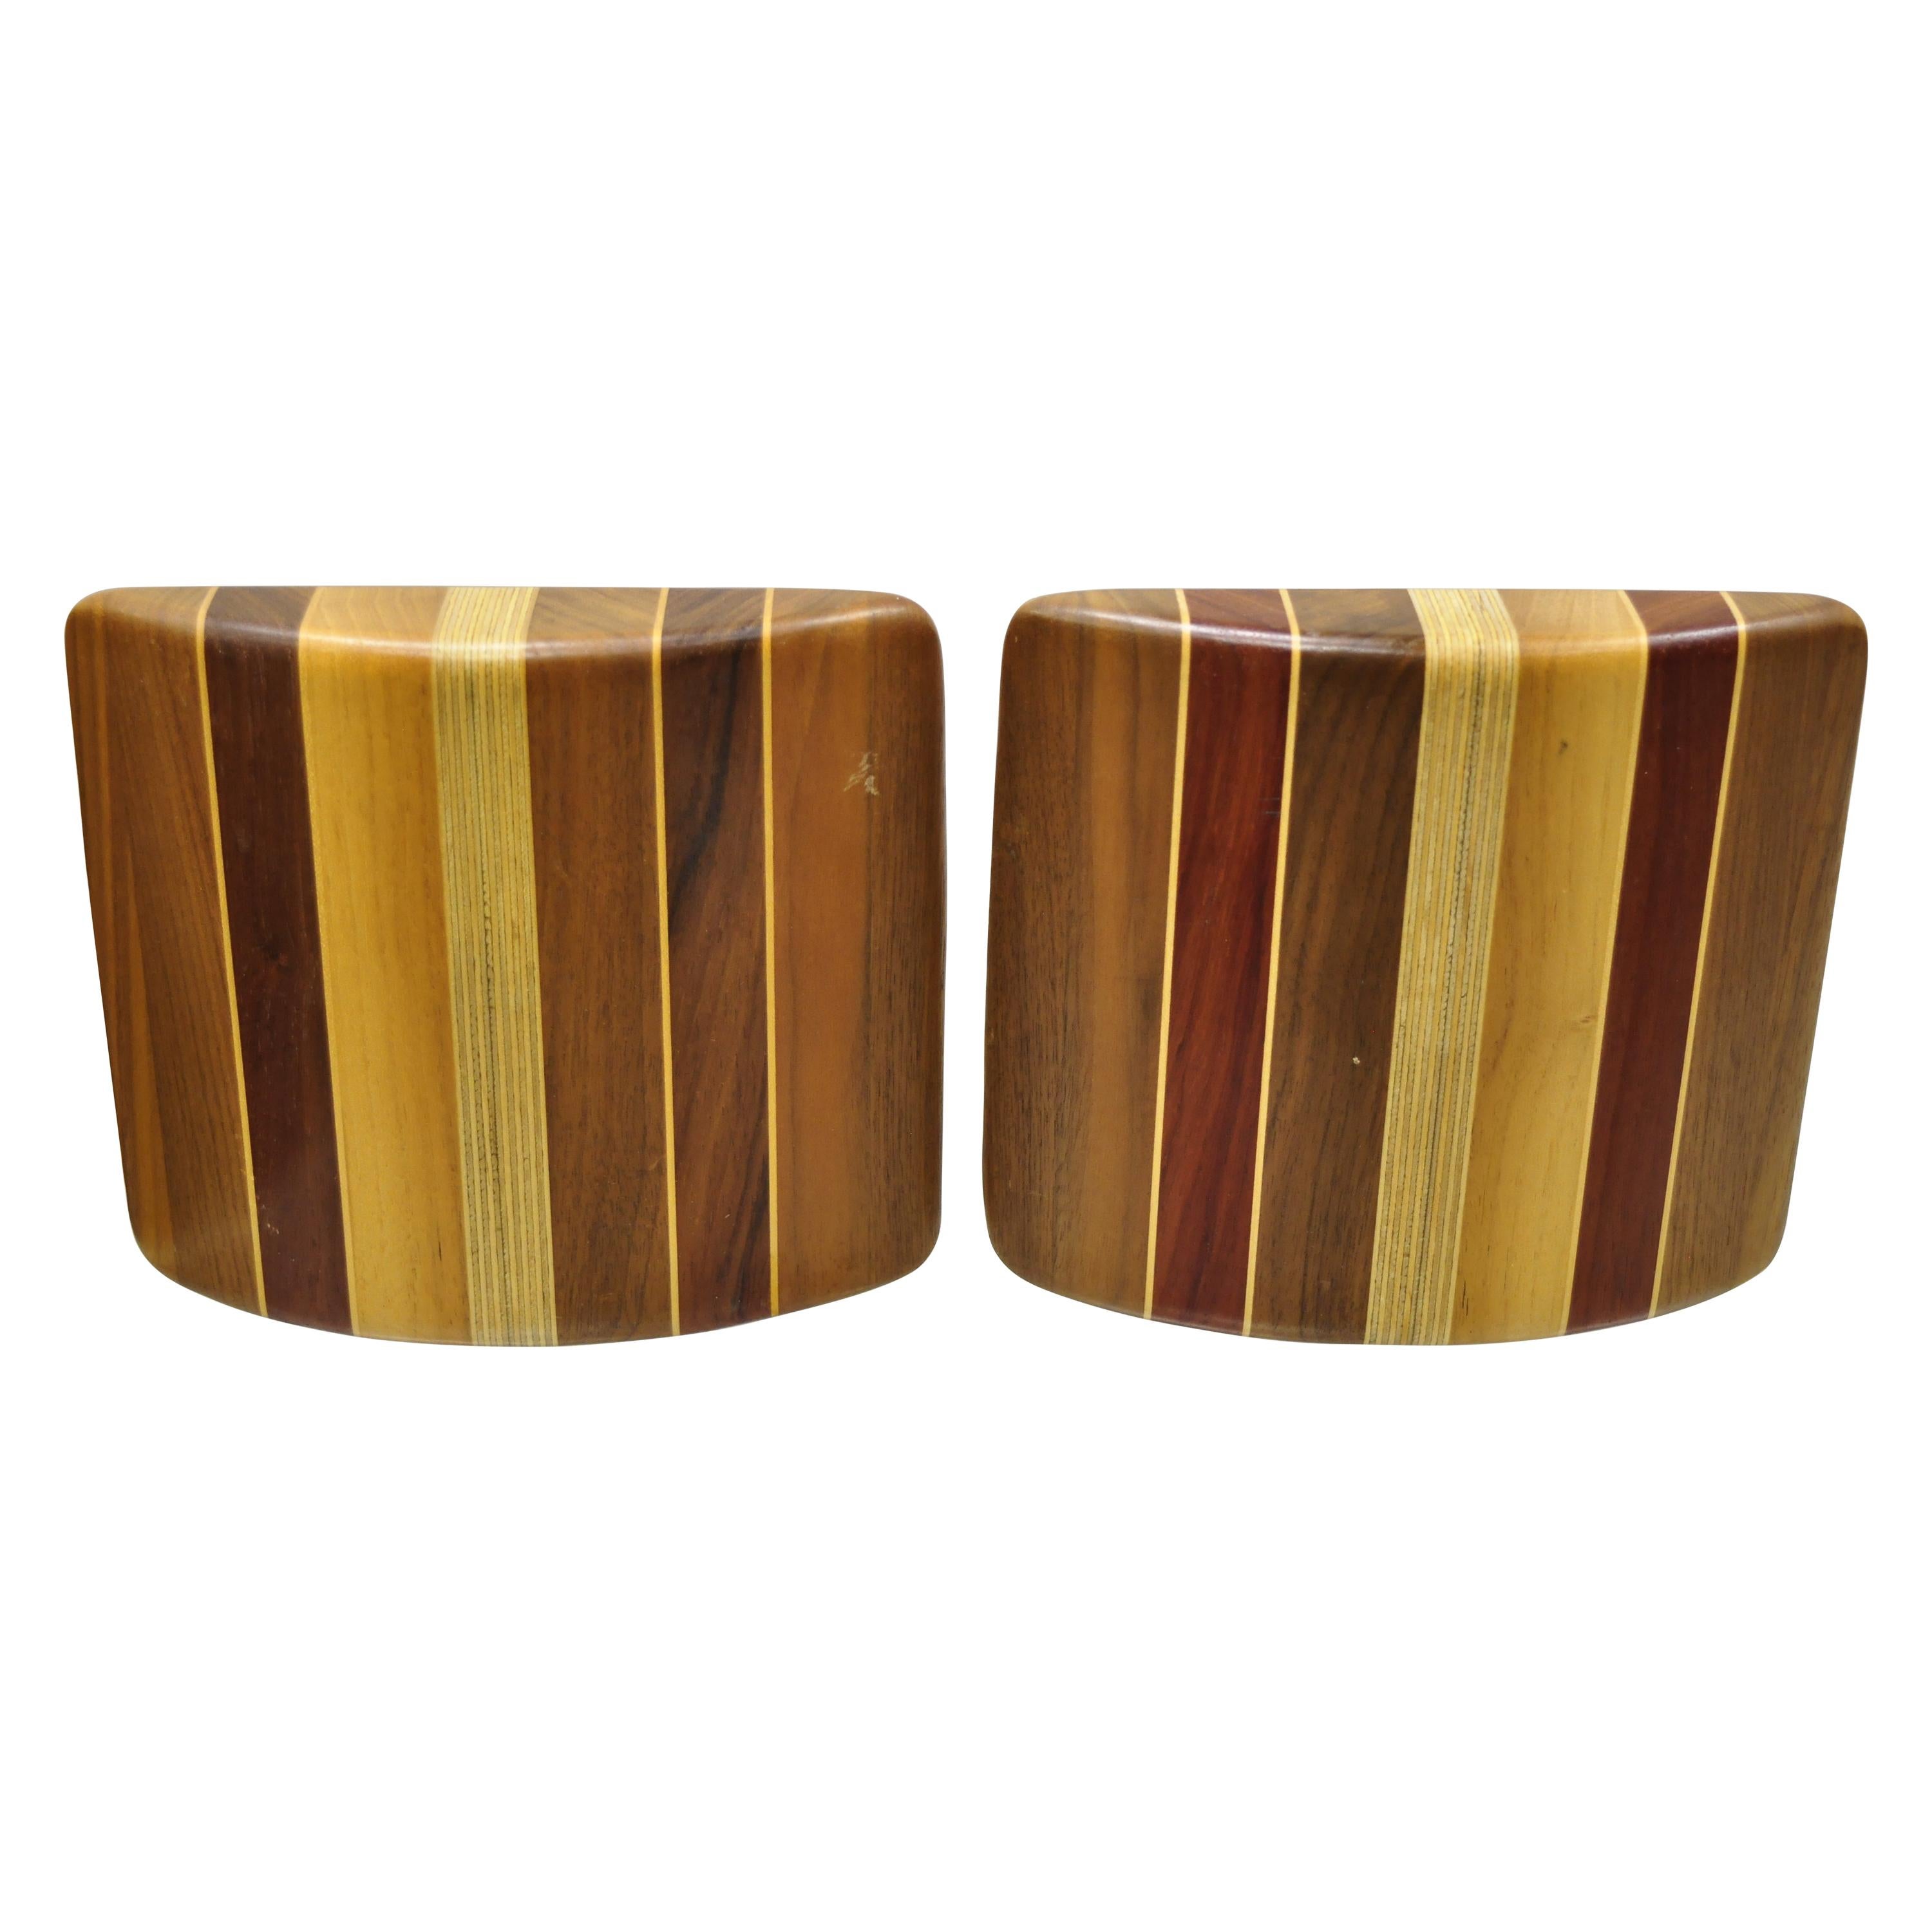 Vintage Mid-Century Modern Solid Wood with Inlay Curved Bookends, a Pair For Sale